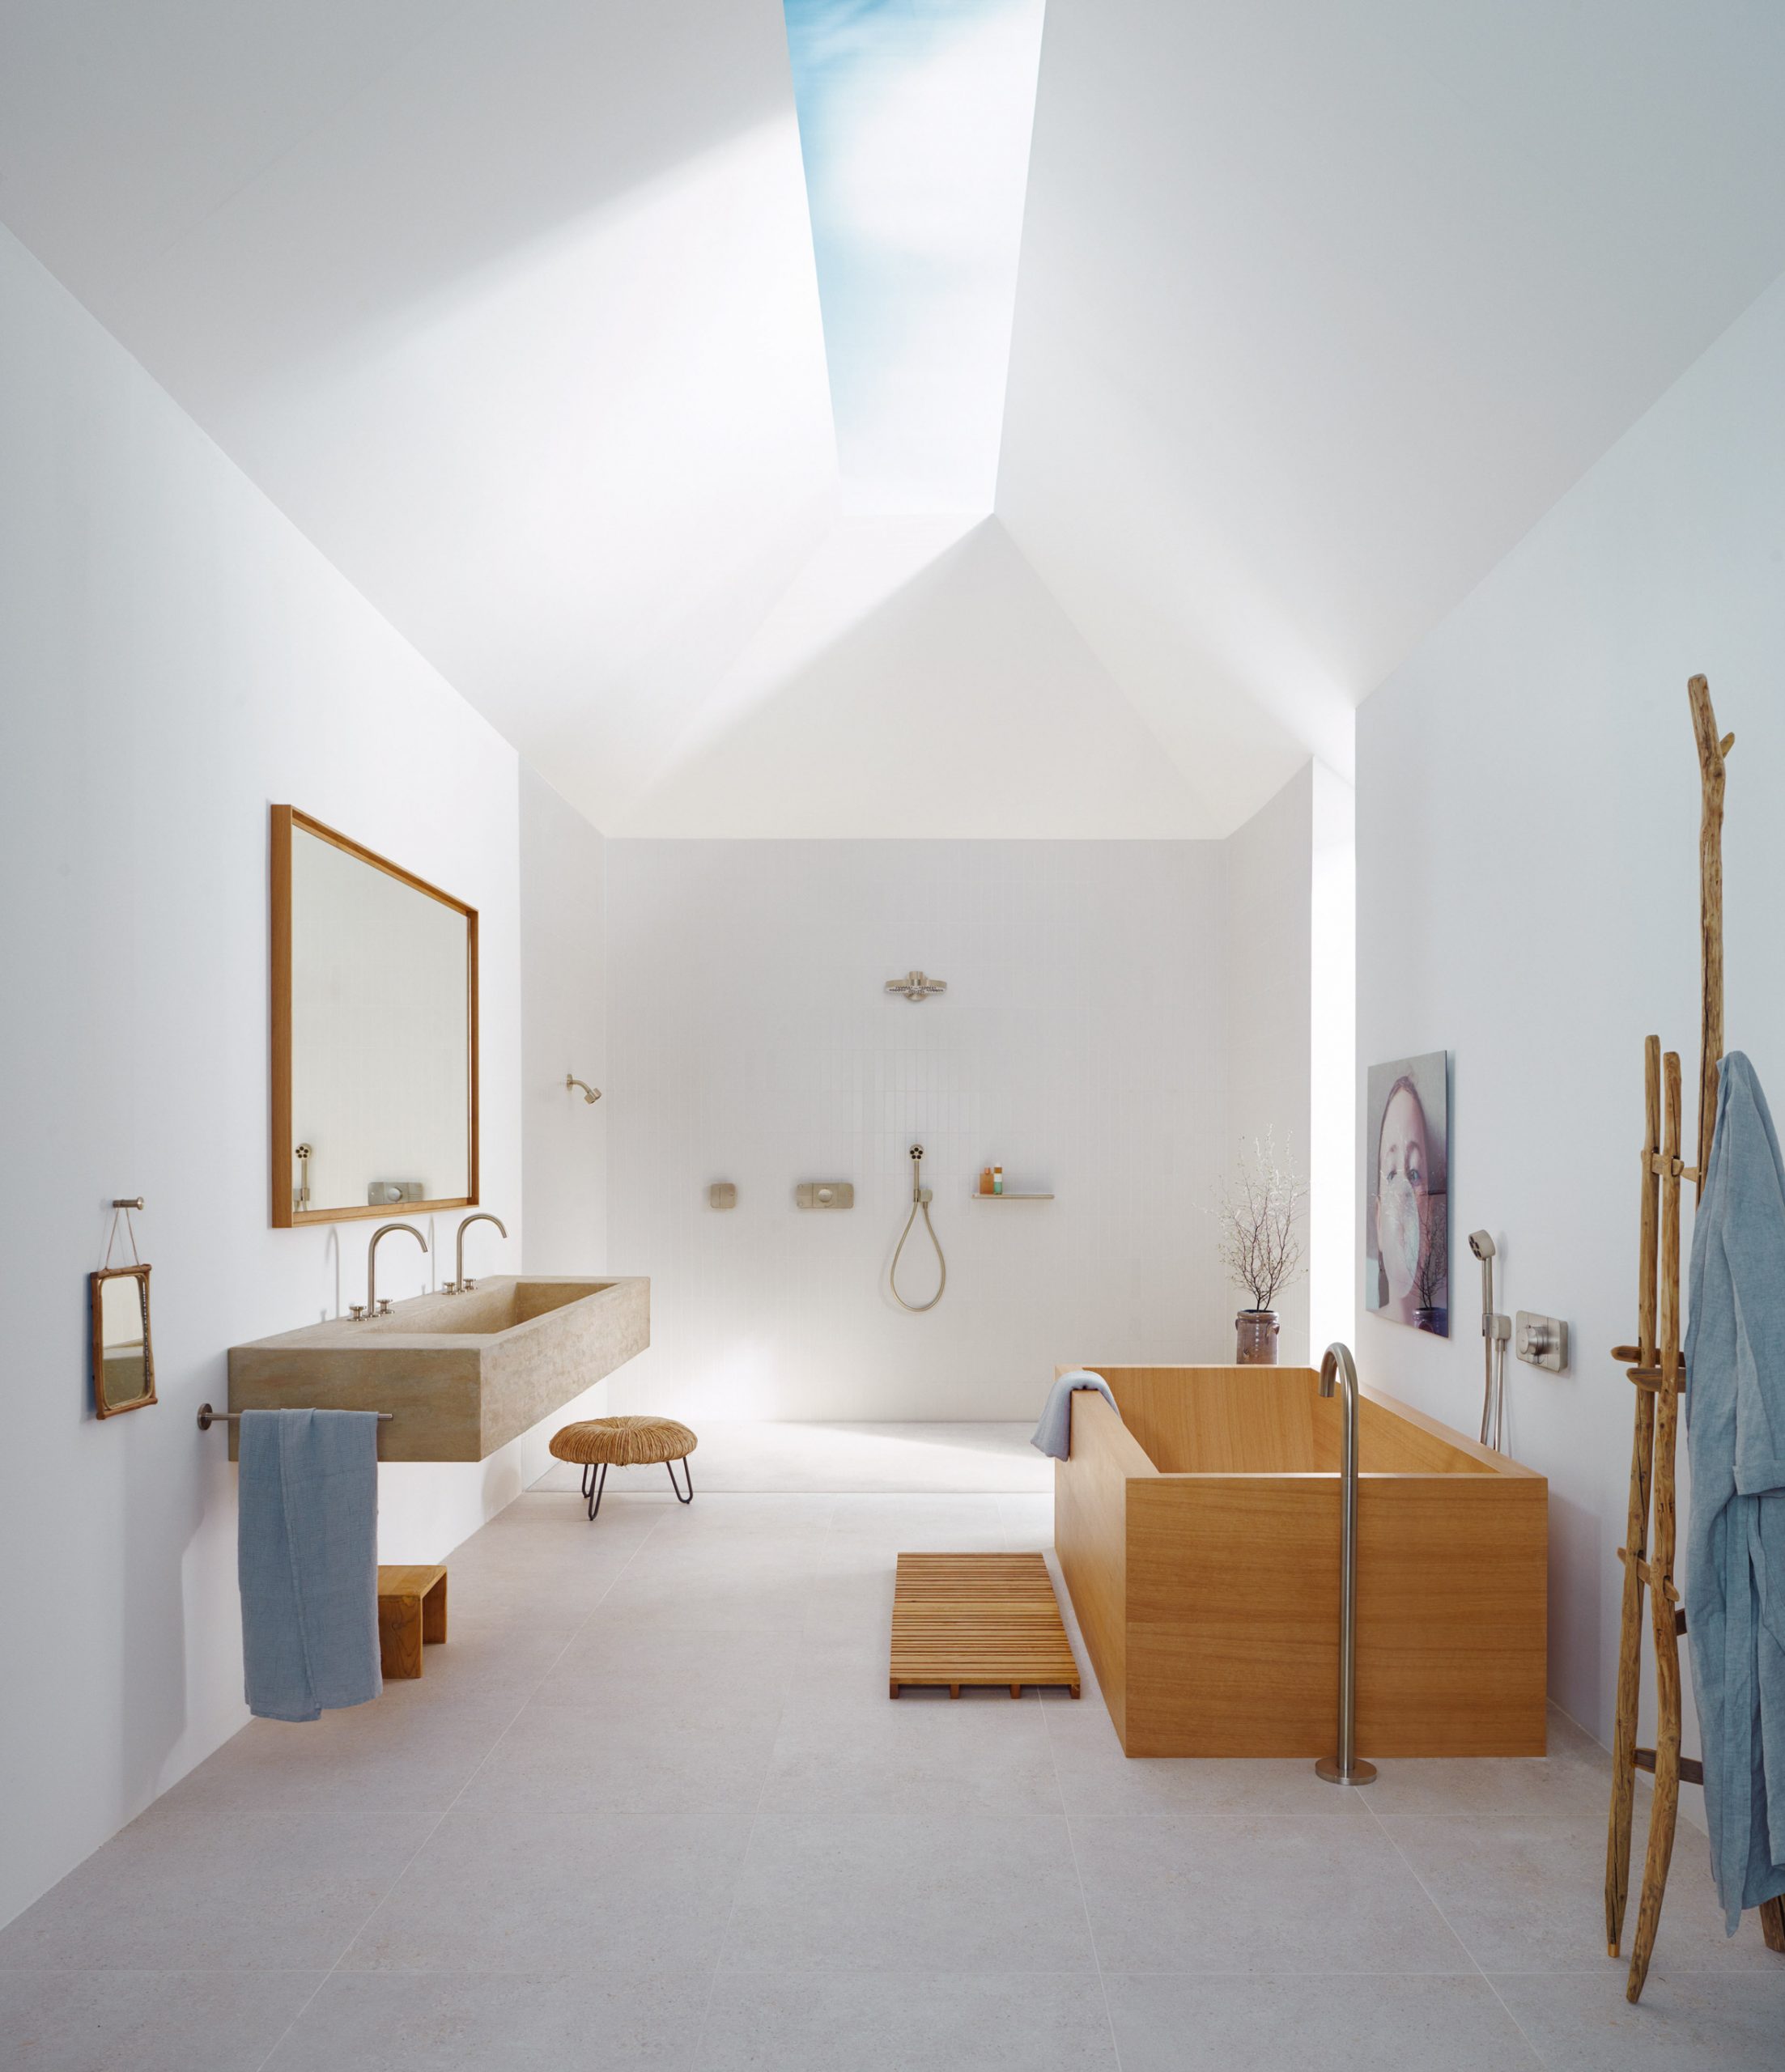 A white bathroom with wooden detailing